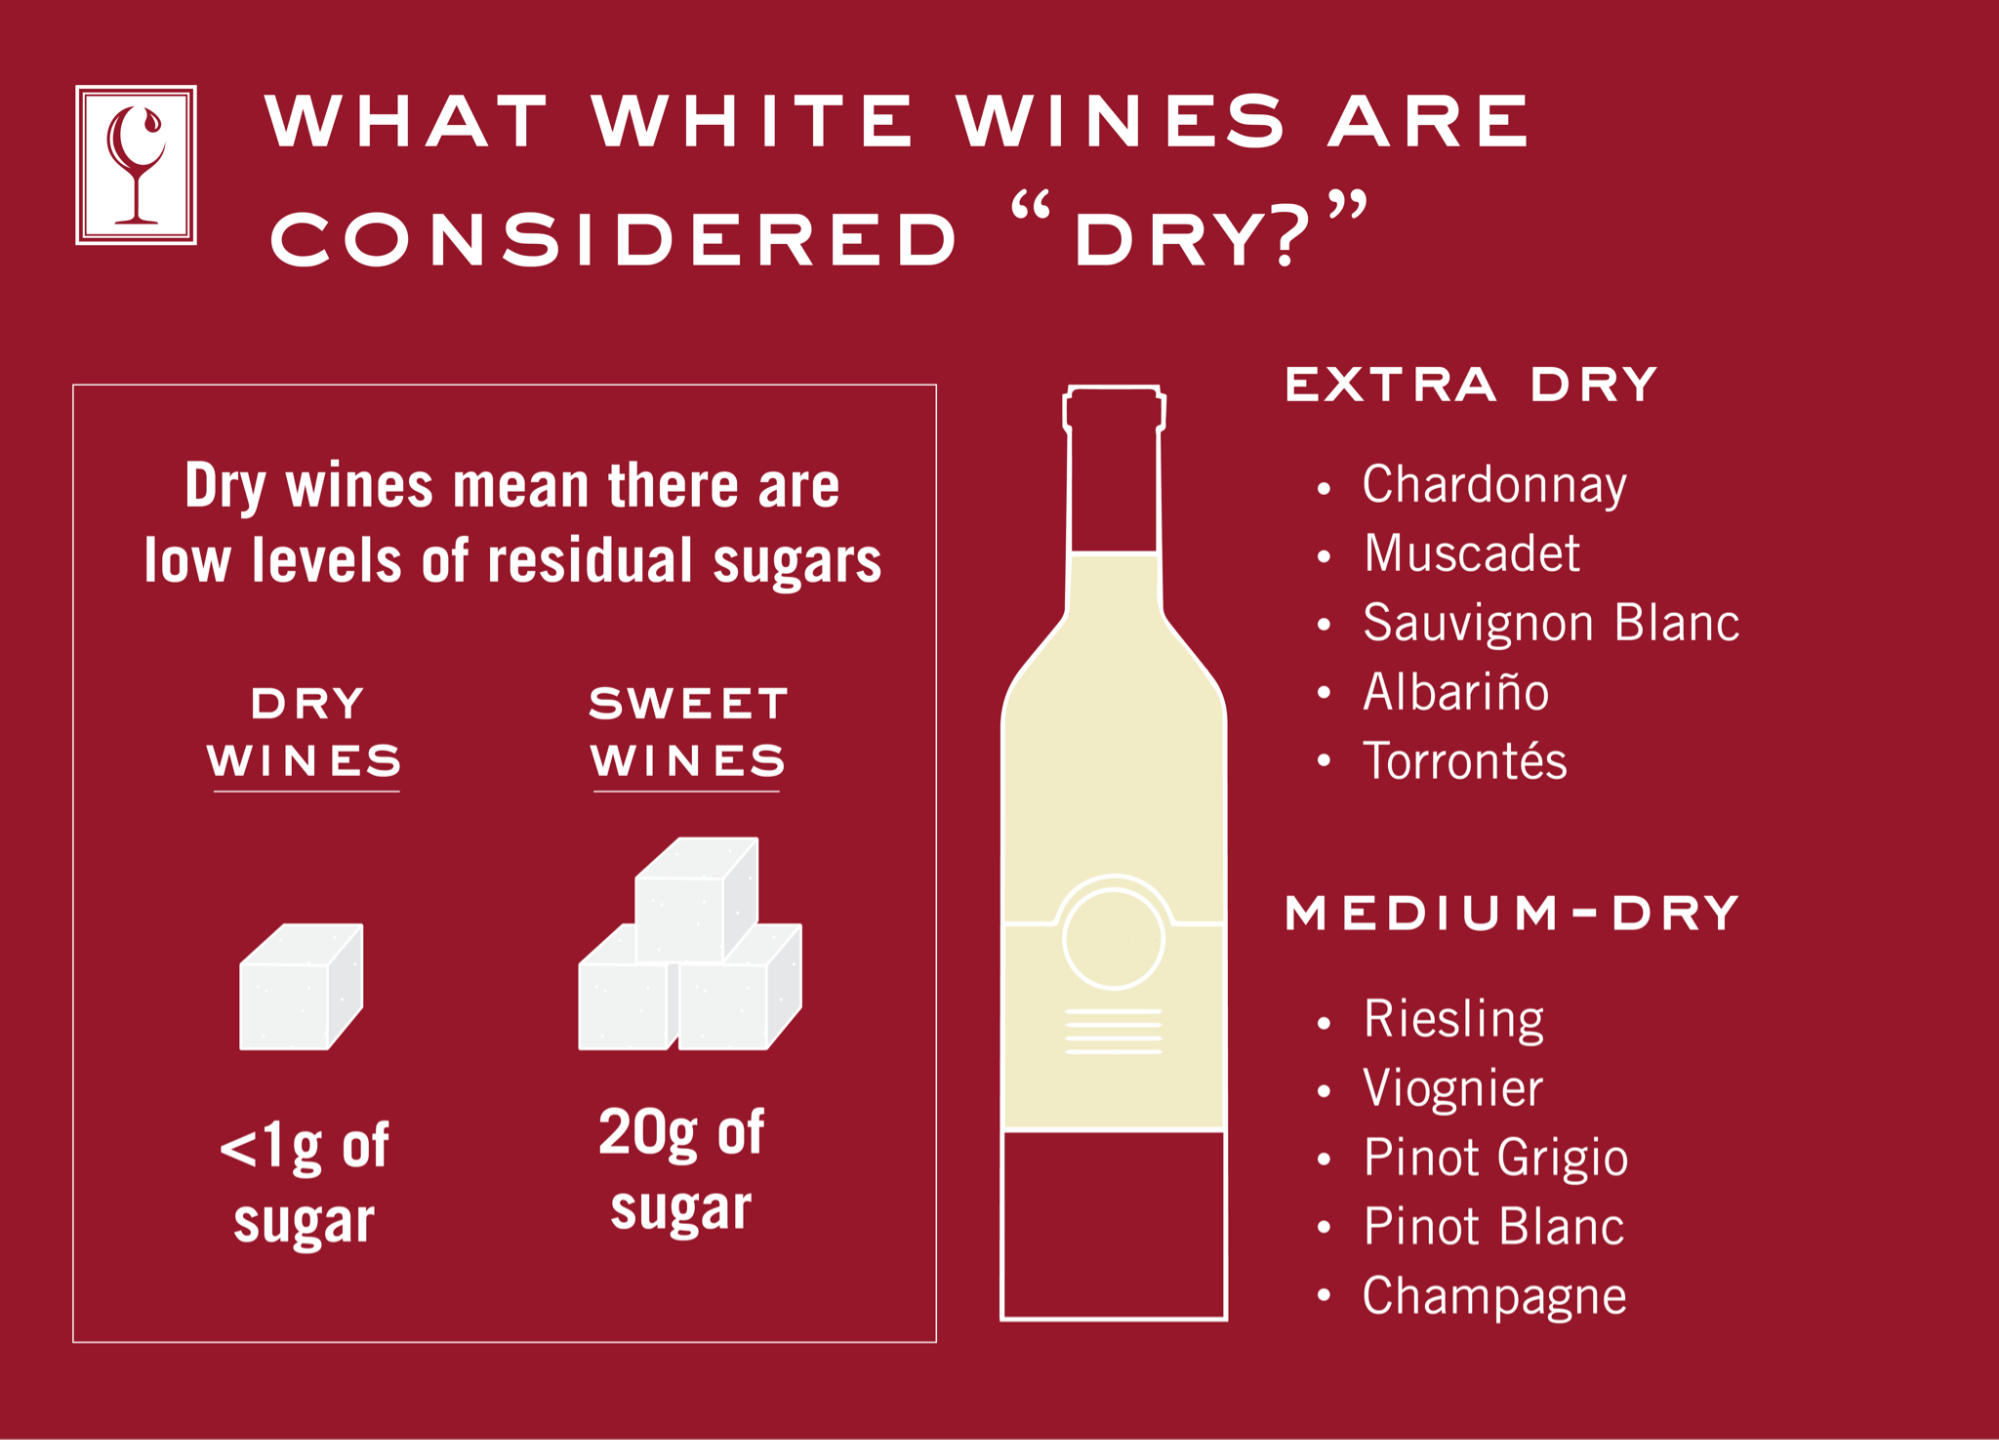 what white wines are considered dry?